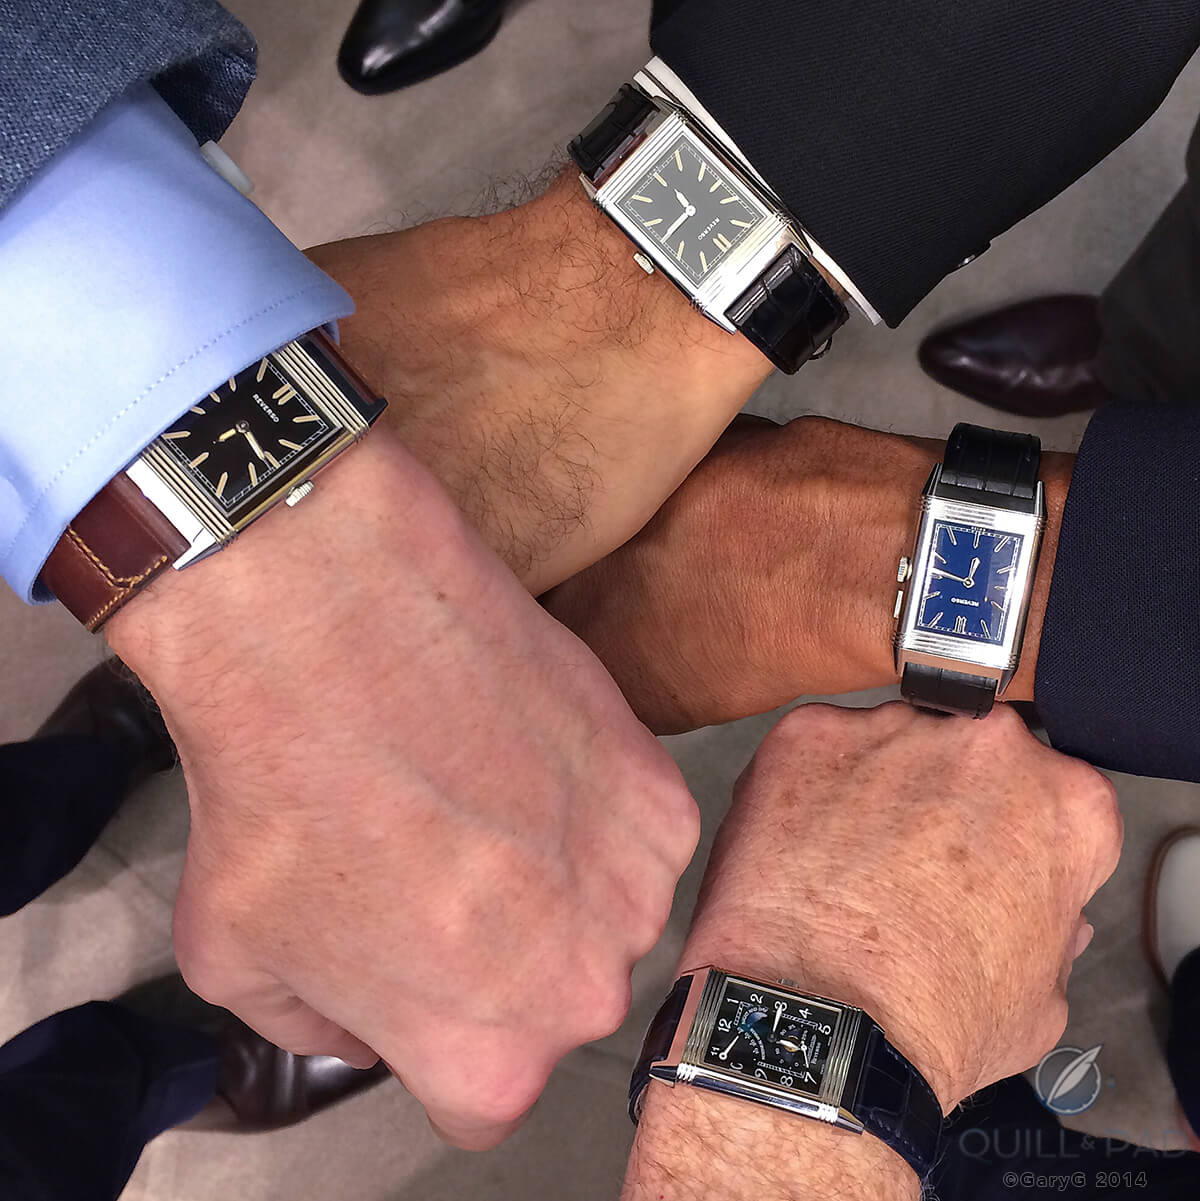 : Supporting the brand: group wristshot at the Jaeger-LeCoultre Costa Mesa OCNA event